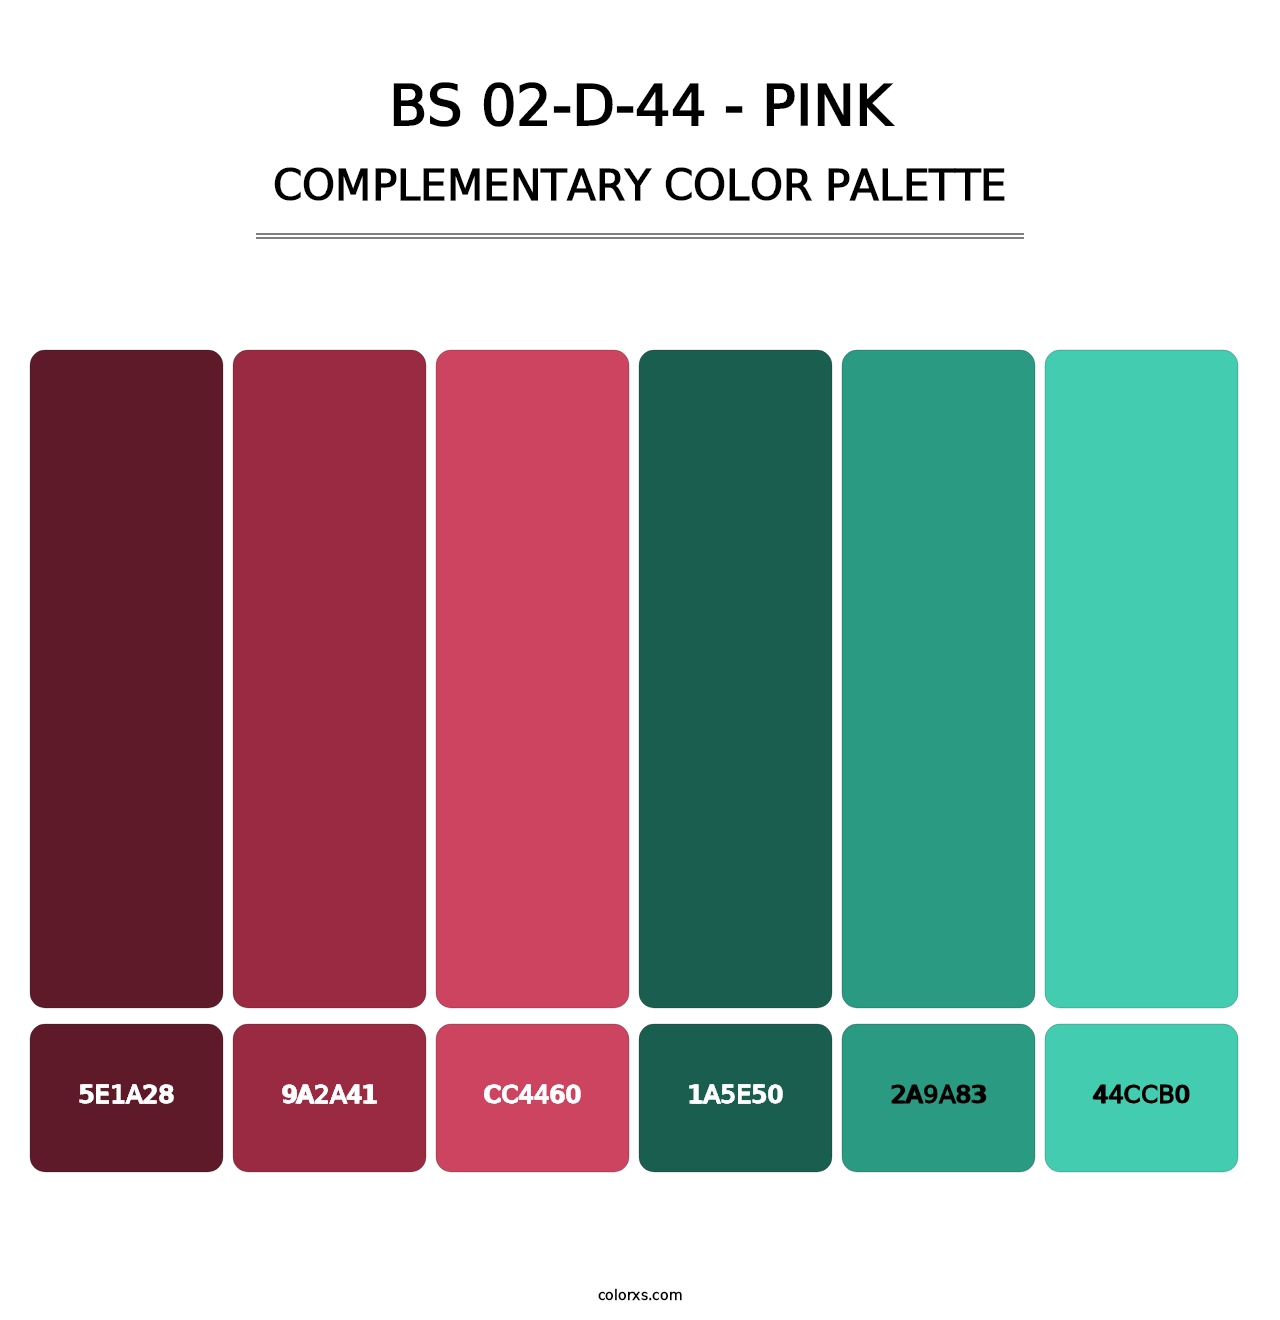 BS 02-D-44 - Pink - Complementary Color Palette